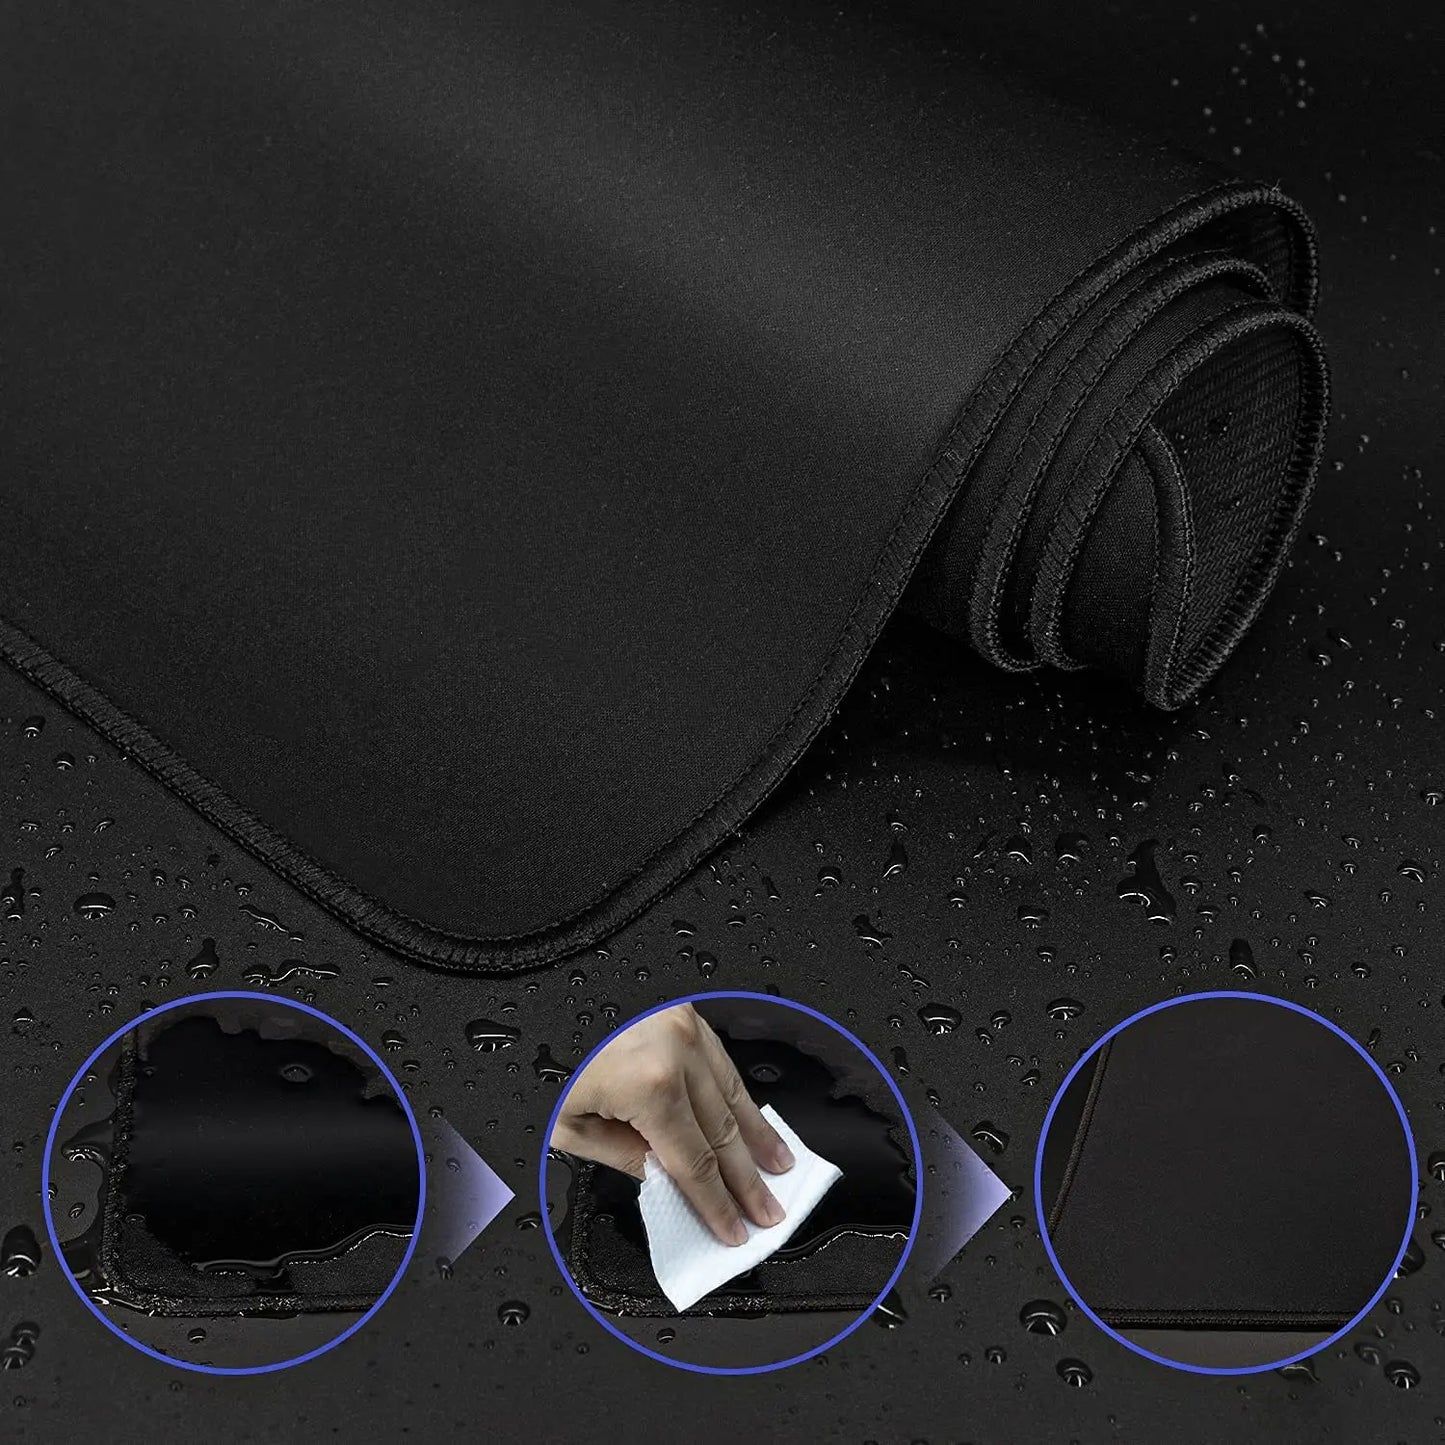 XXL Black Gaming Mouse Pad - Large Mousepad for Gamers, PC Desk Mat Keyboard Pad, Computer Mousepad